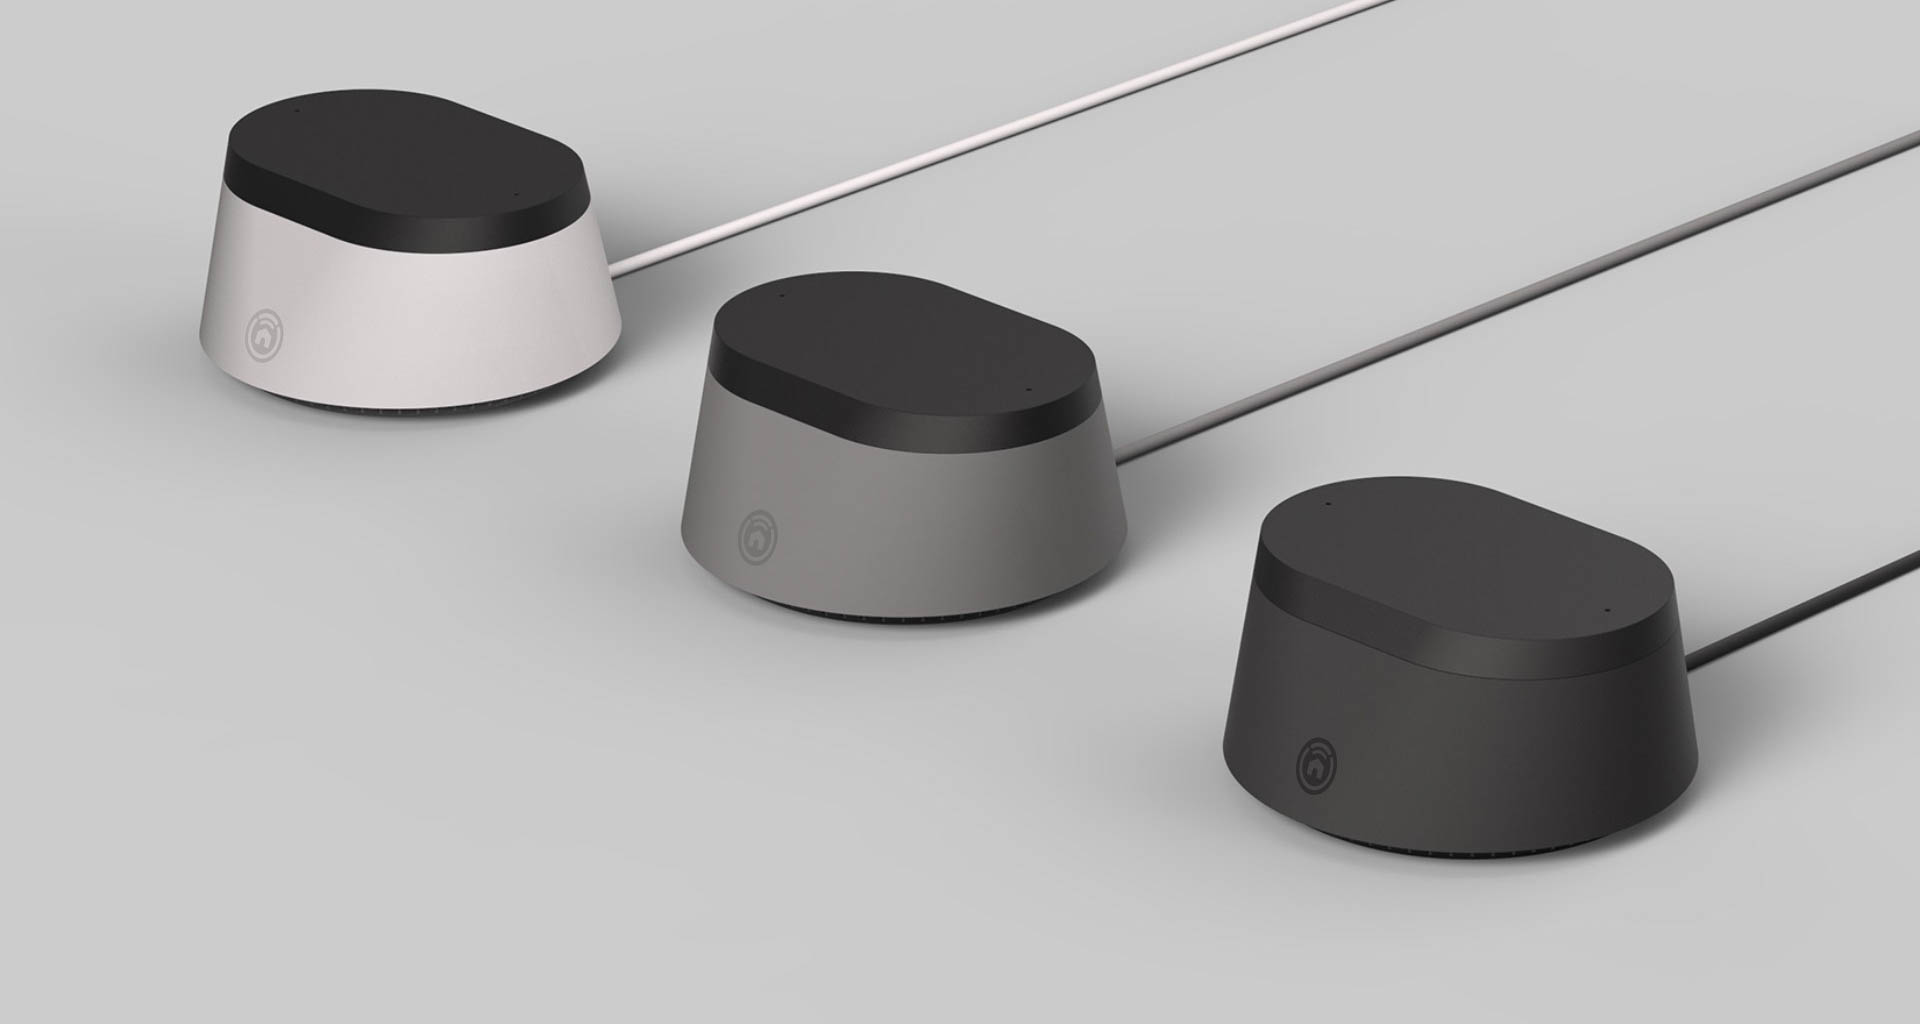 The Nevo Butler is a combination smart home hub and voice assistant. Image: Universal Electronics.